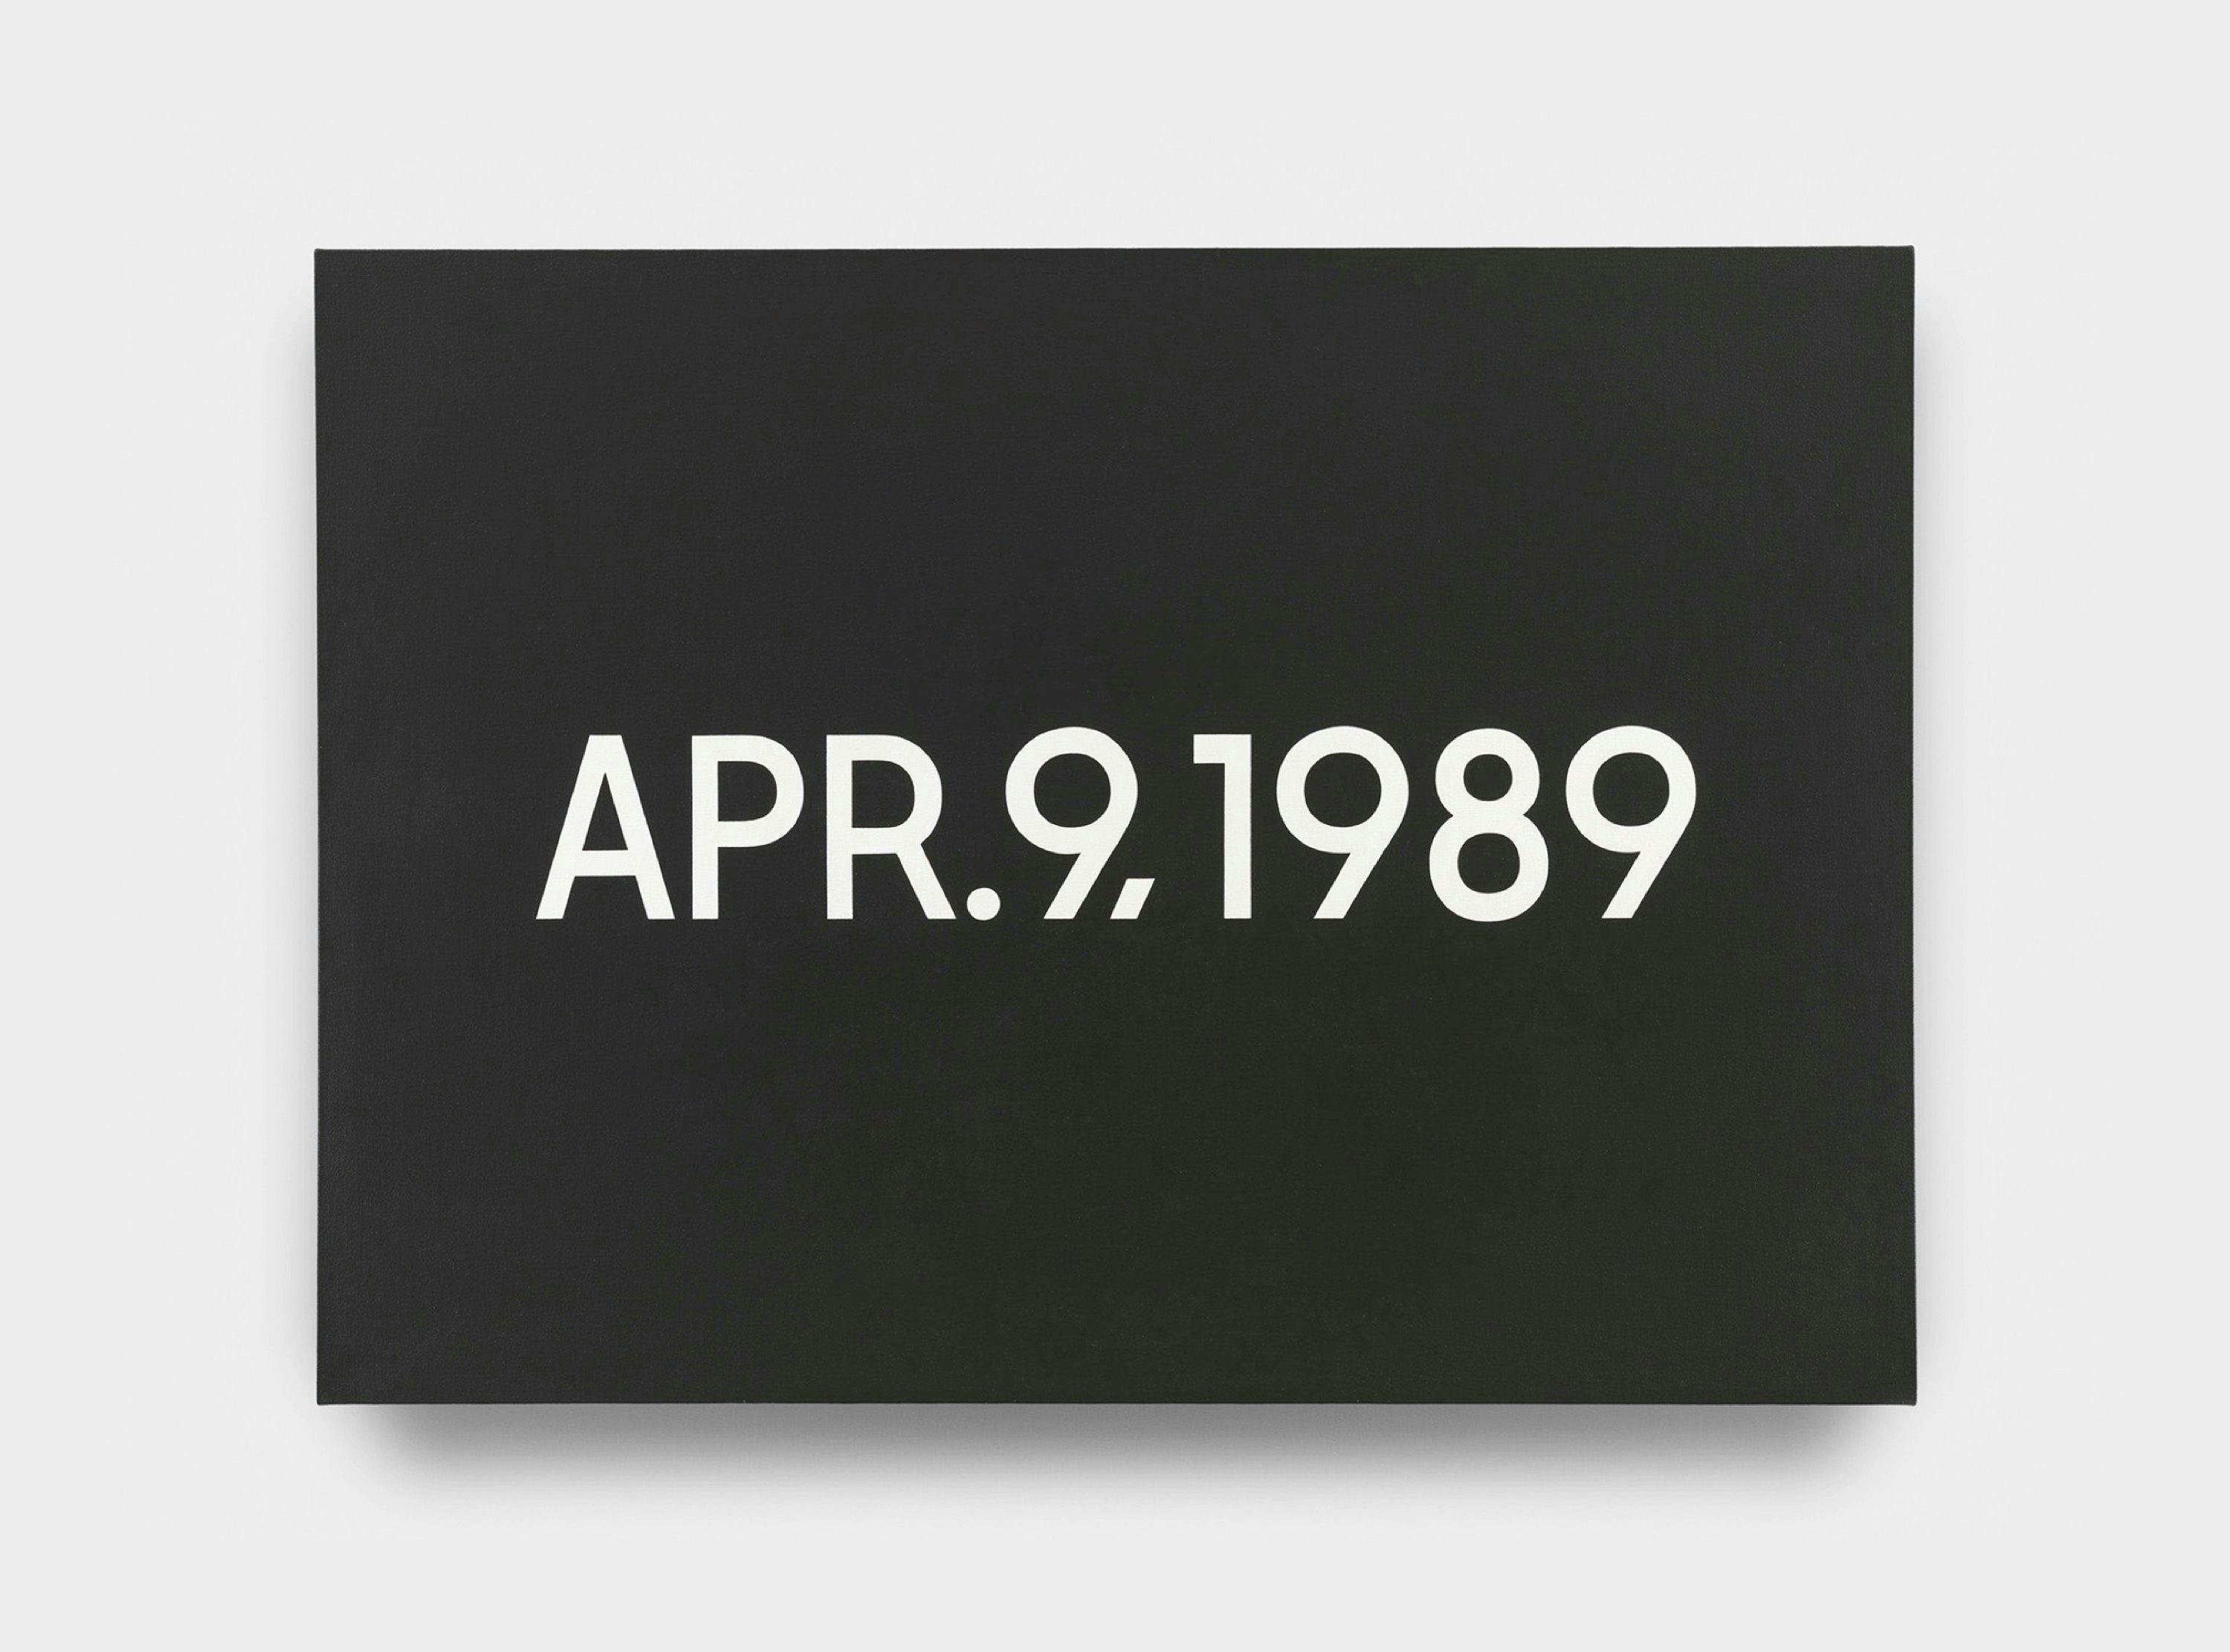 A painting by On Kawara, titled APR. 9, 1989, dated 1989.